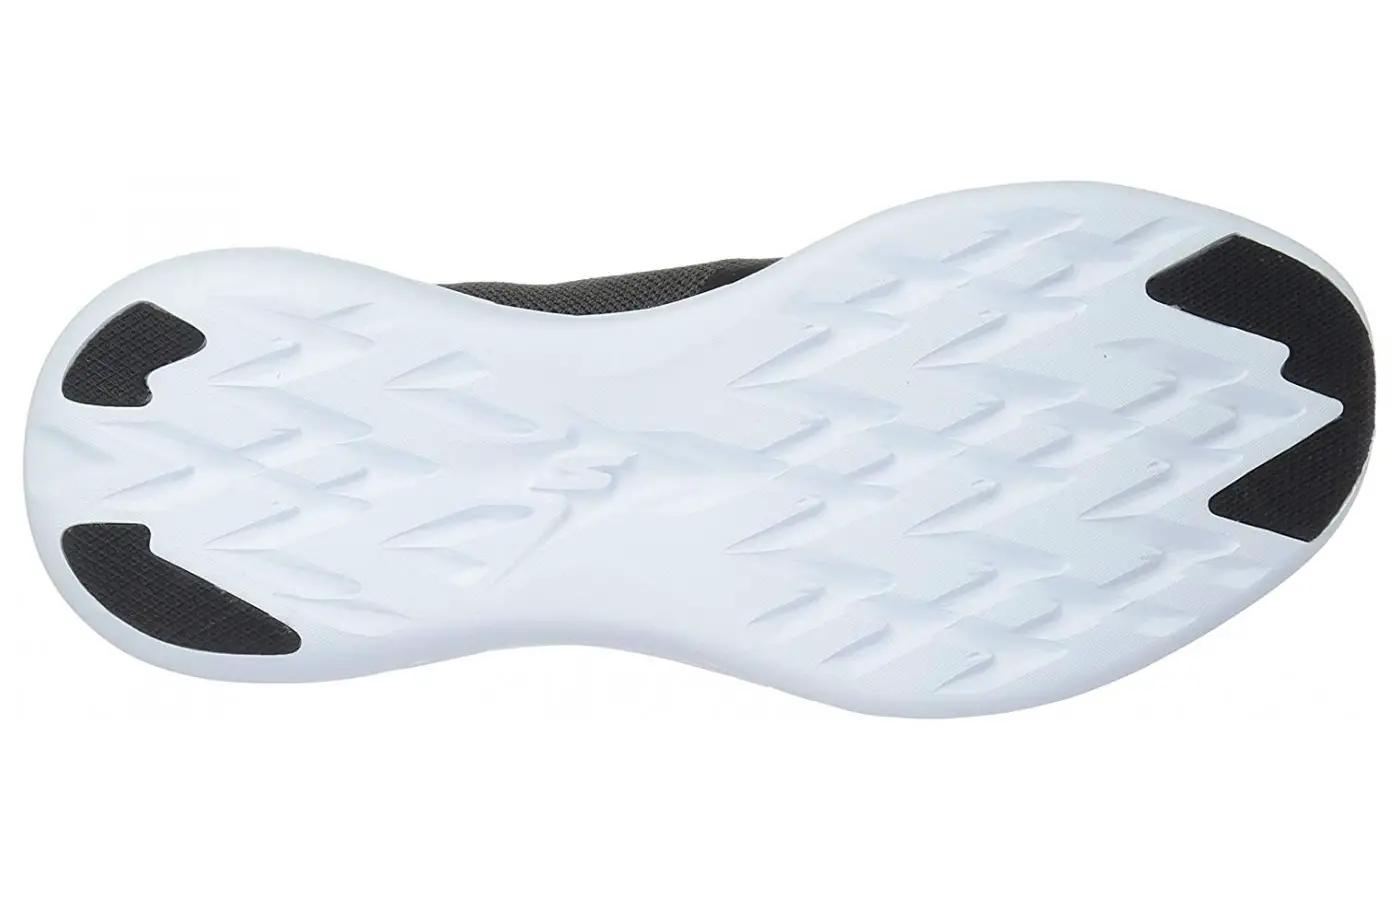 Rubber pads at the toe and heel protect and add grip.